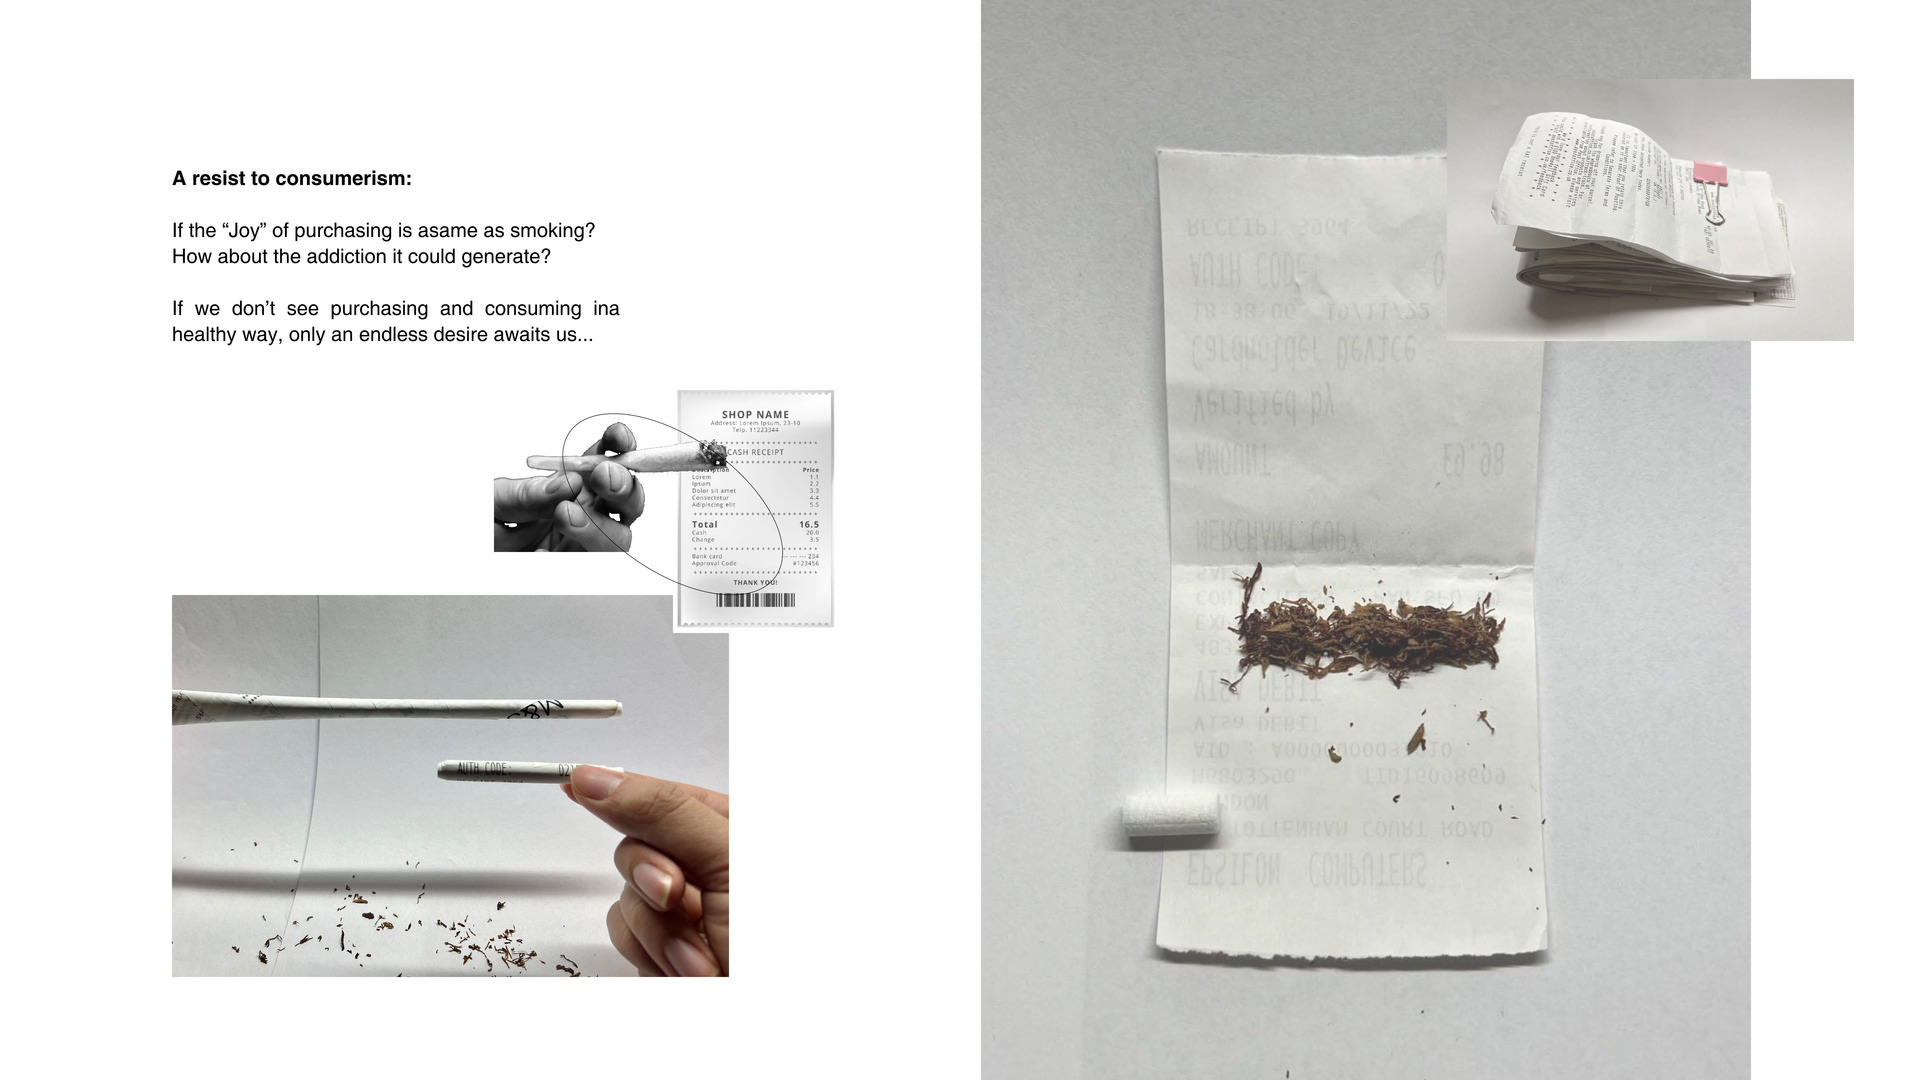 Receipt as paper to roll cigarette